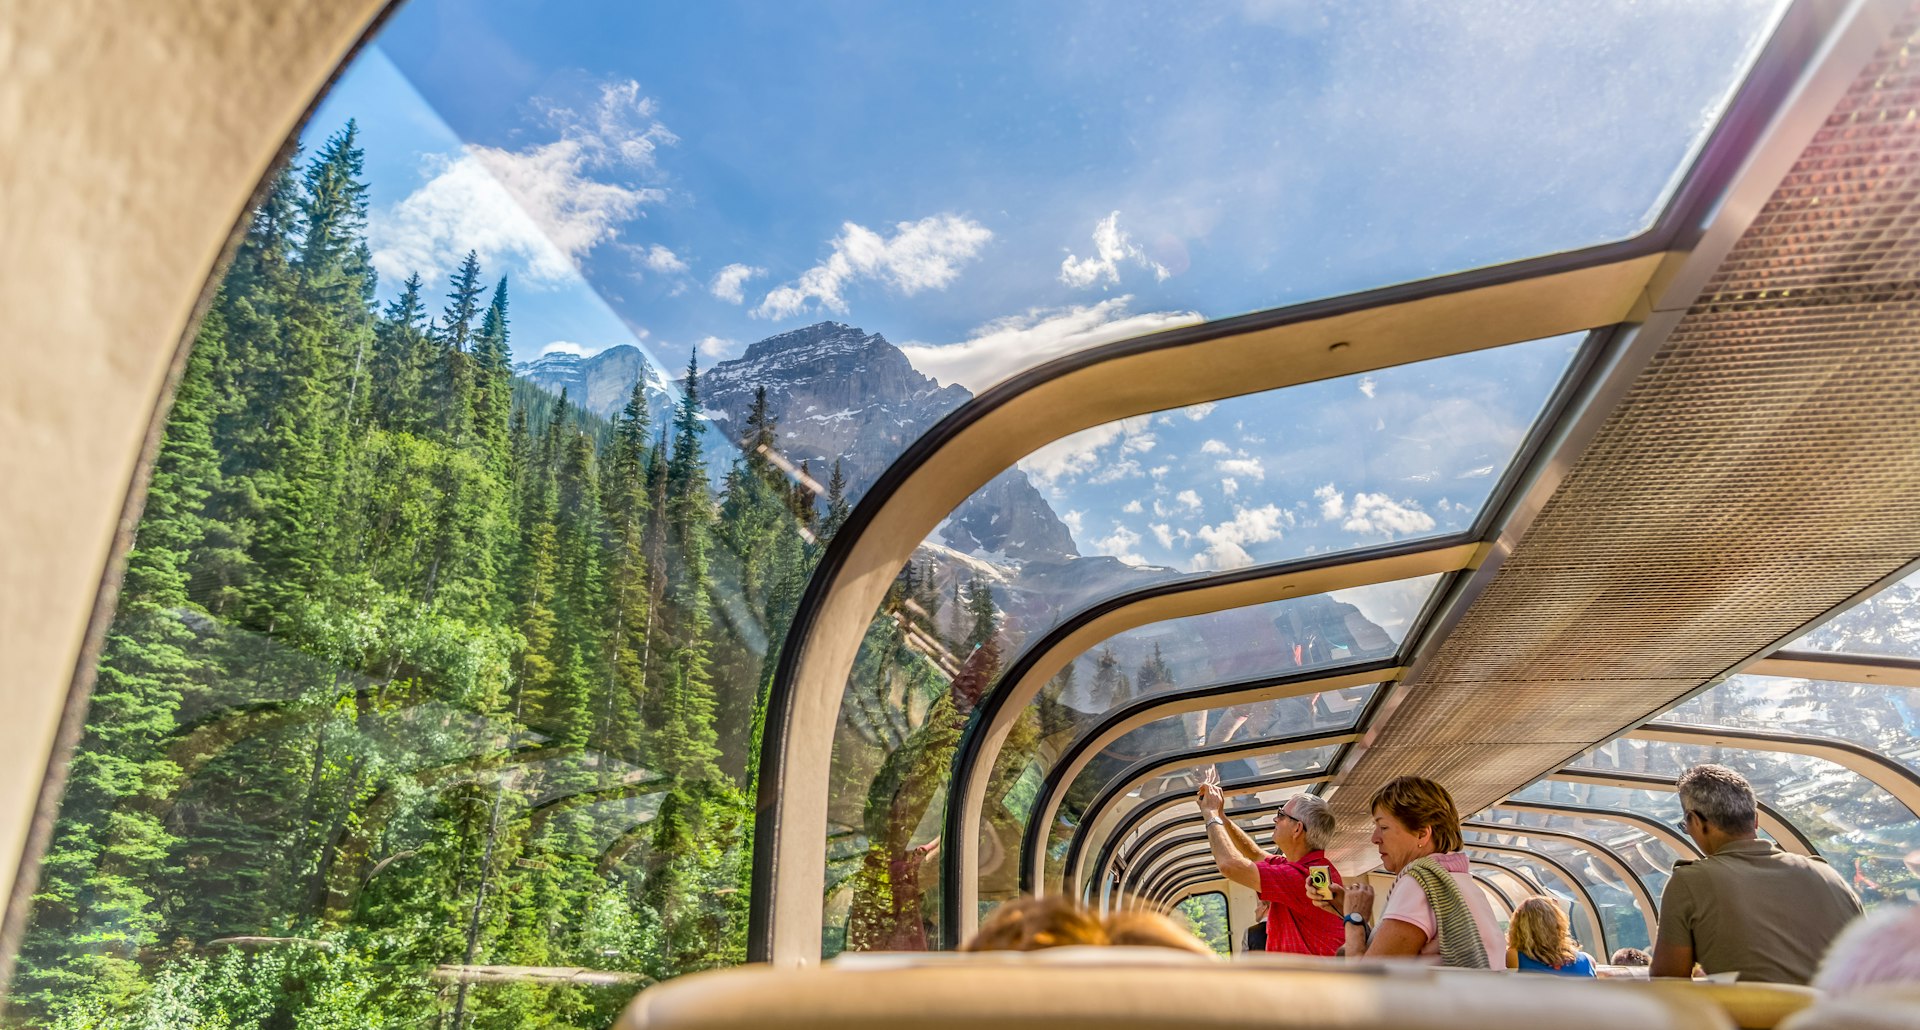 The domed glass roof of a viewing carriage on a train. People stand up from their seats to get a look at the mountain scenery they're passing through